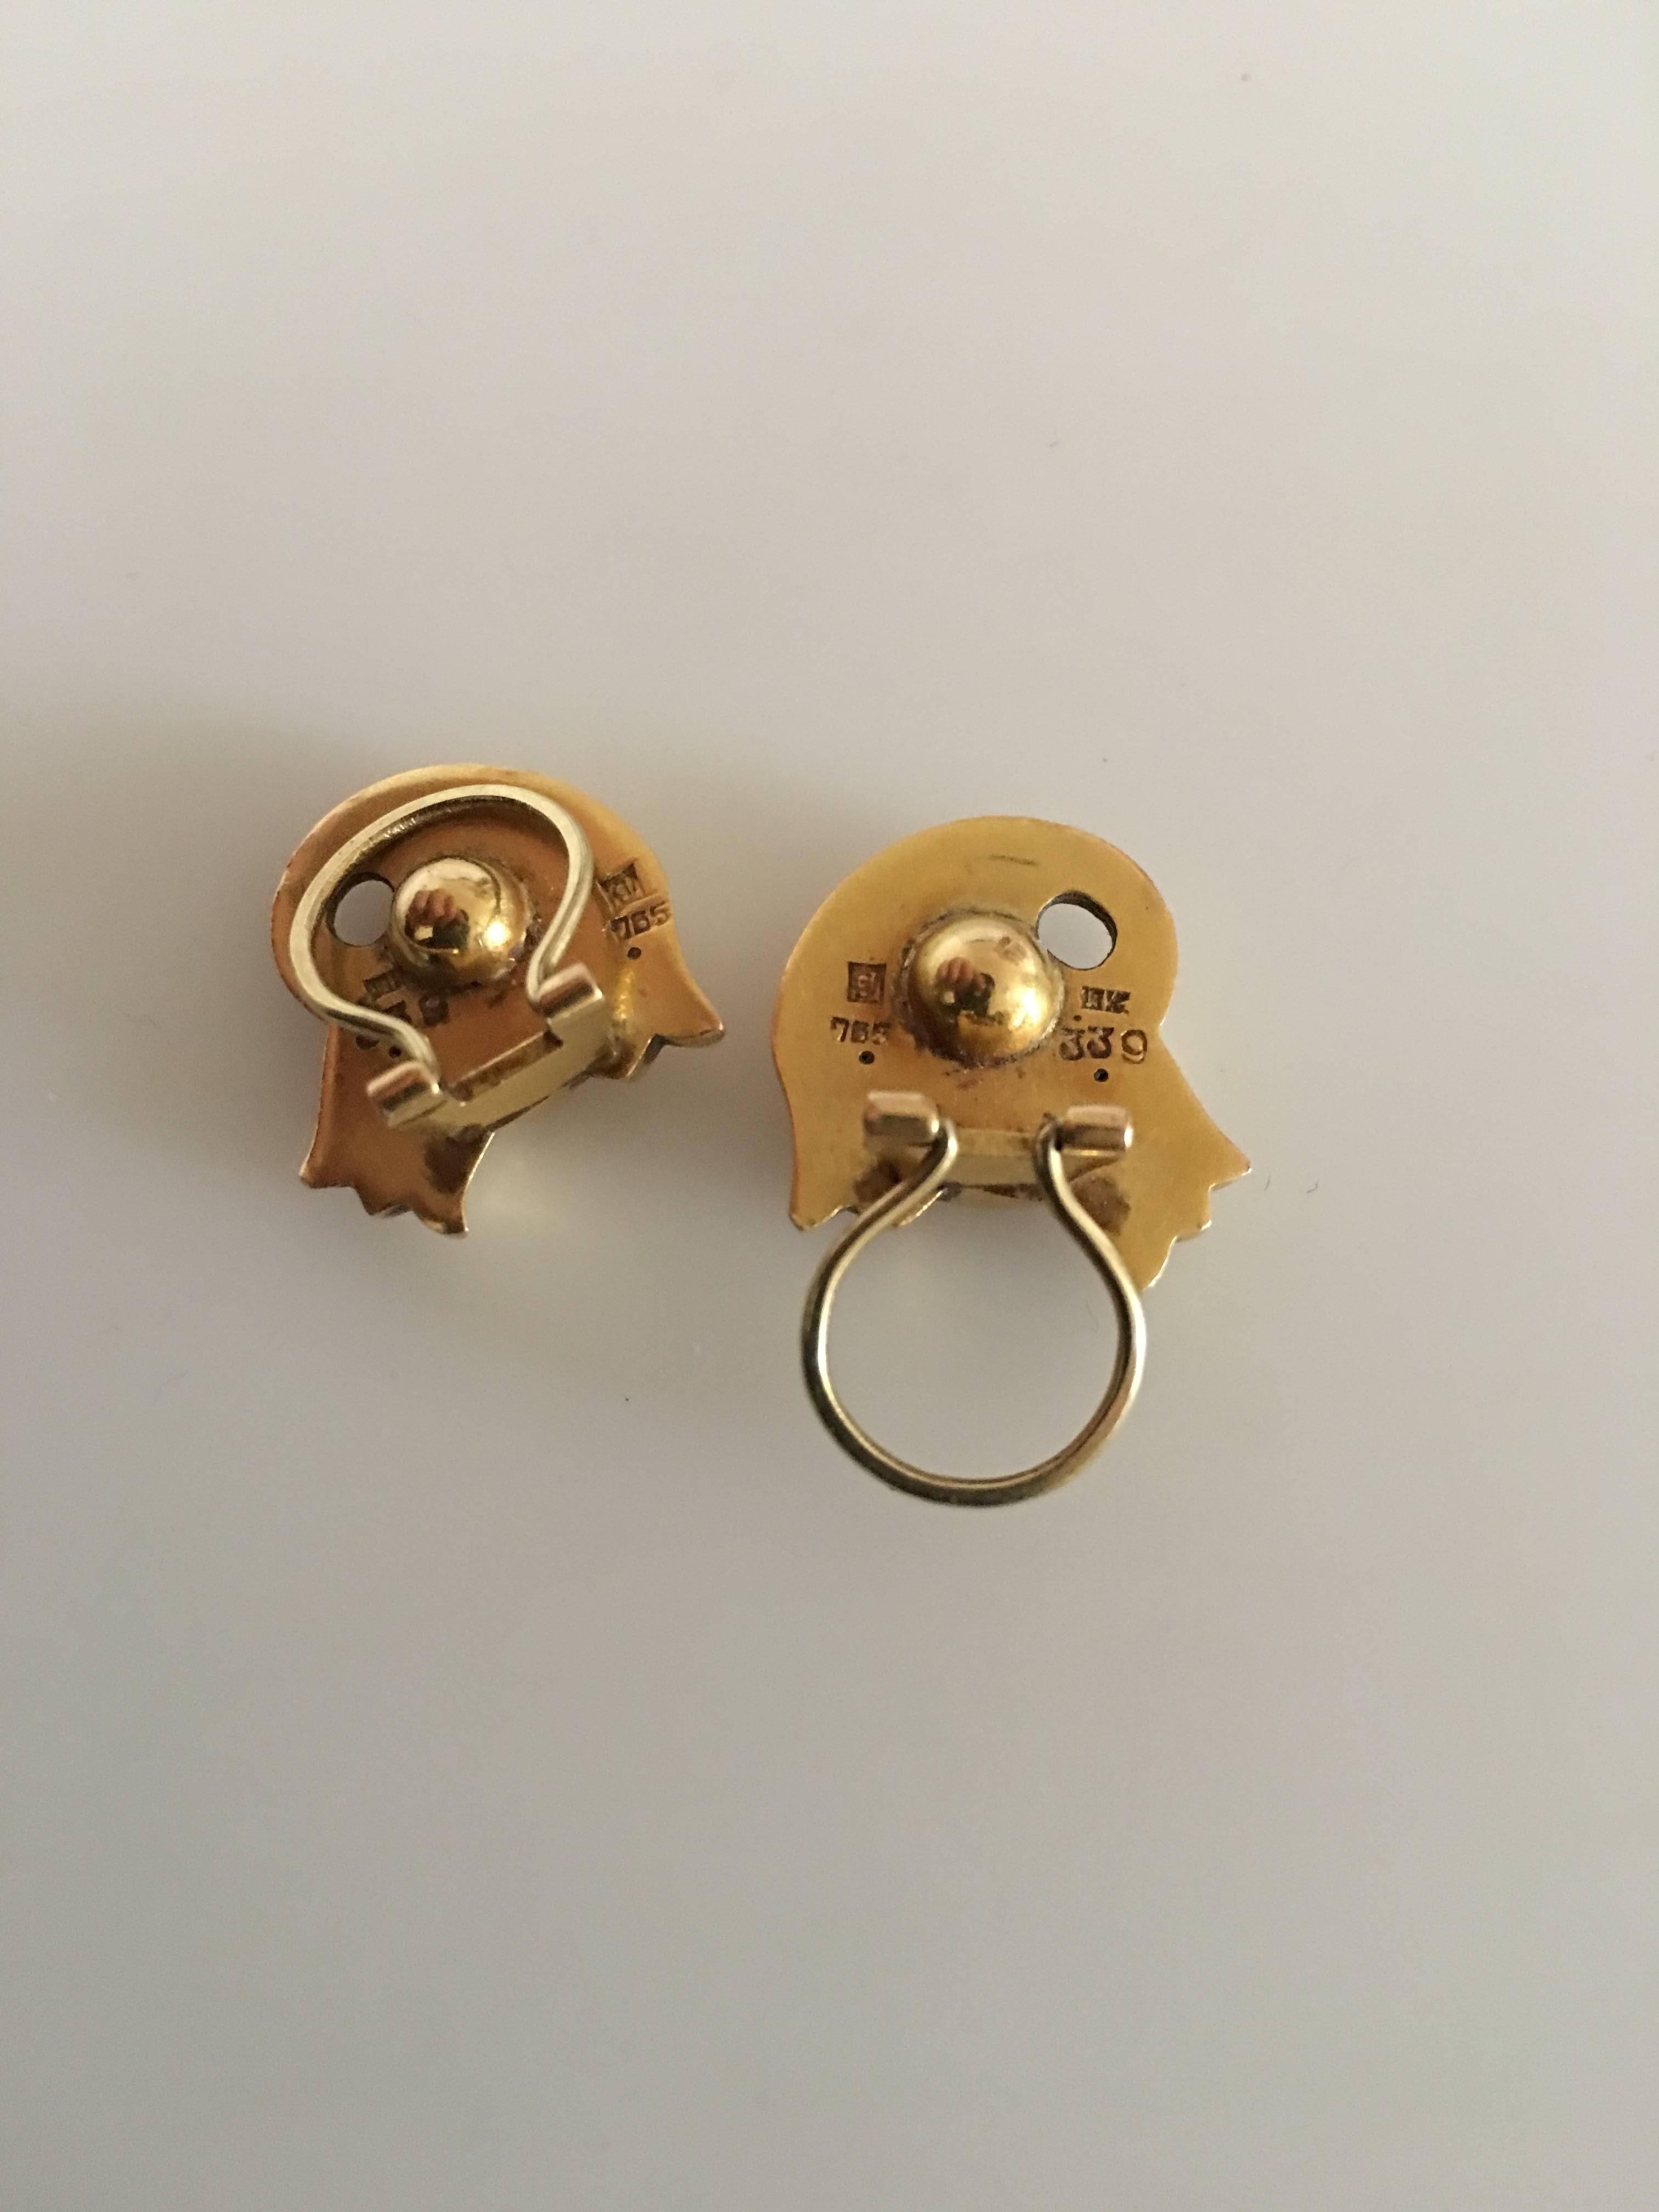 Georg Jensen 18K Gold Earrings (Clips) No. 339. Measures 2.6 cm. Weighs a combined 7 grams (0.25 oz). From 1933. 1944.
